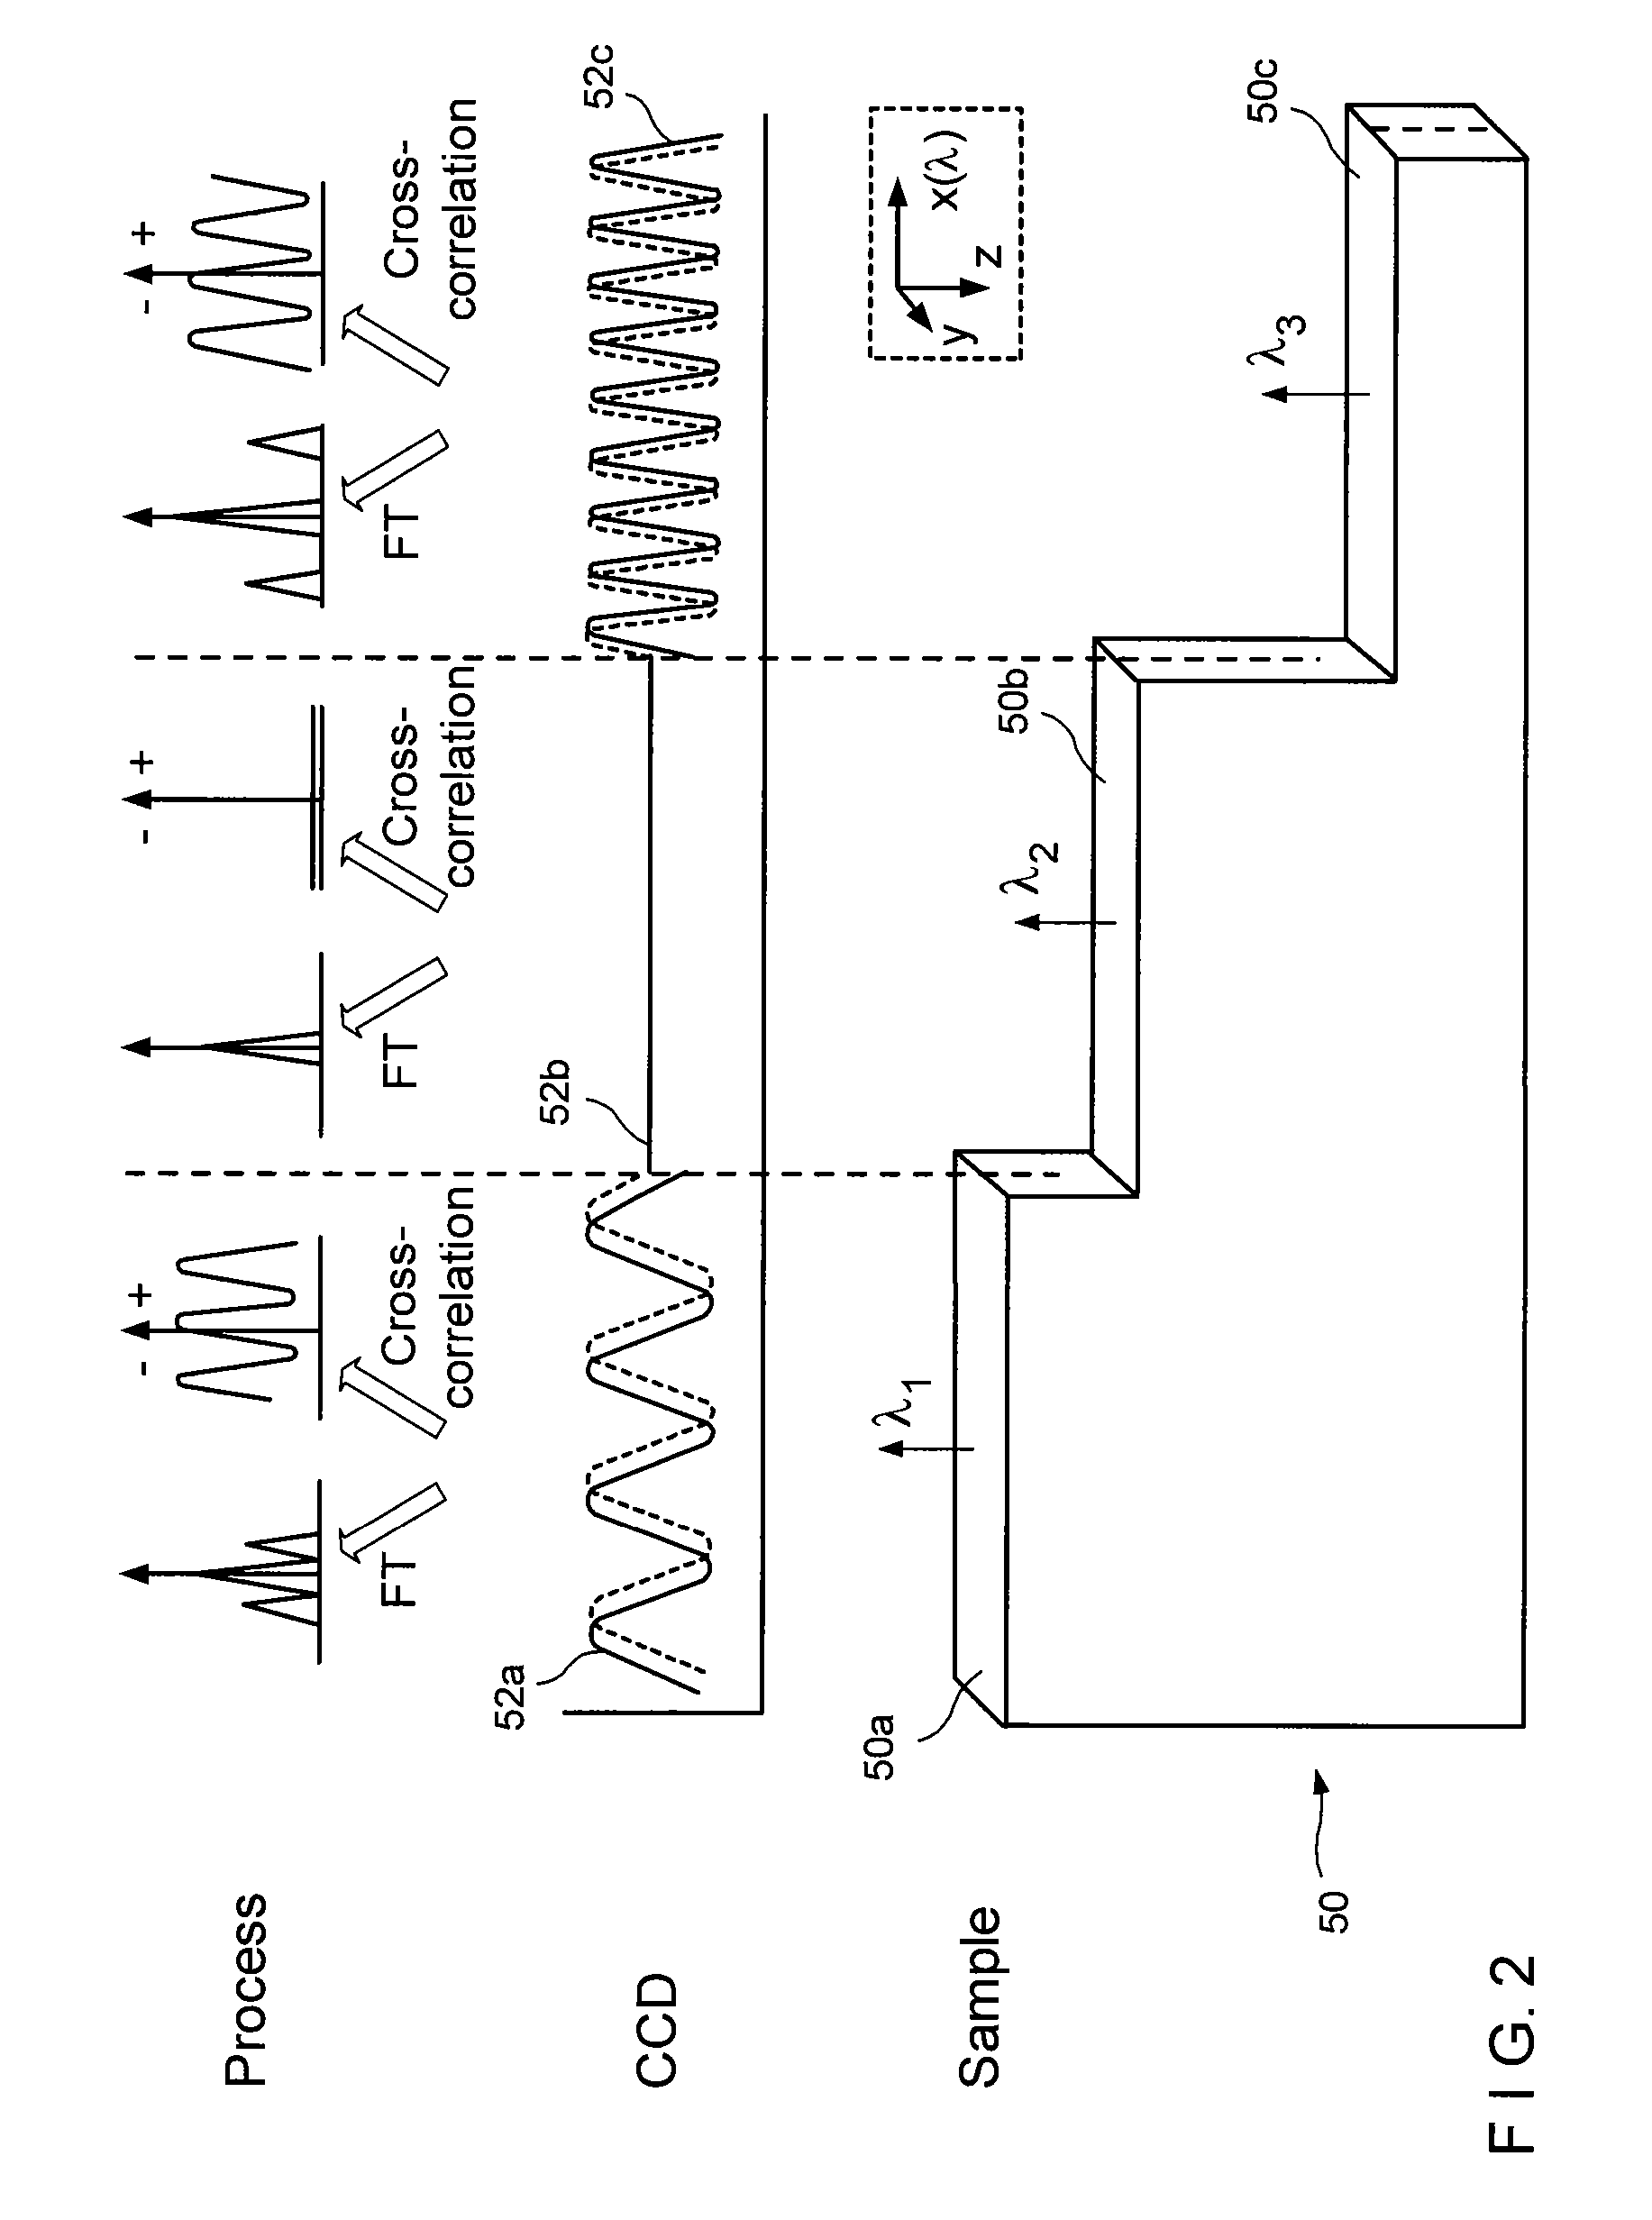 Systems and methods for generating data based on one or more spectrally-encoded endoscopy techniques